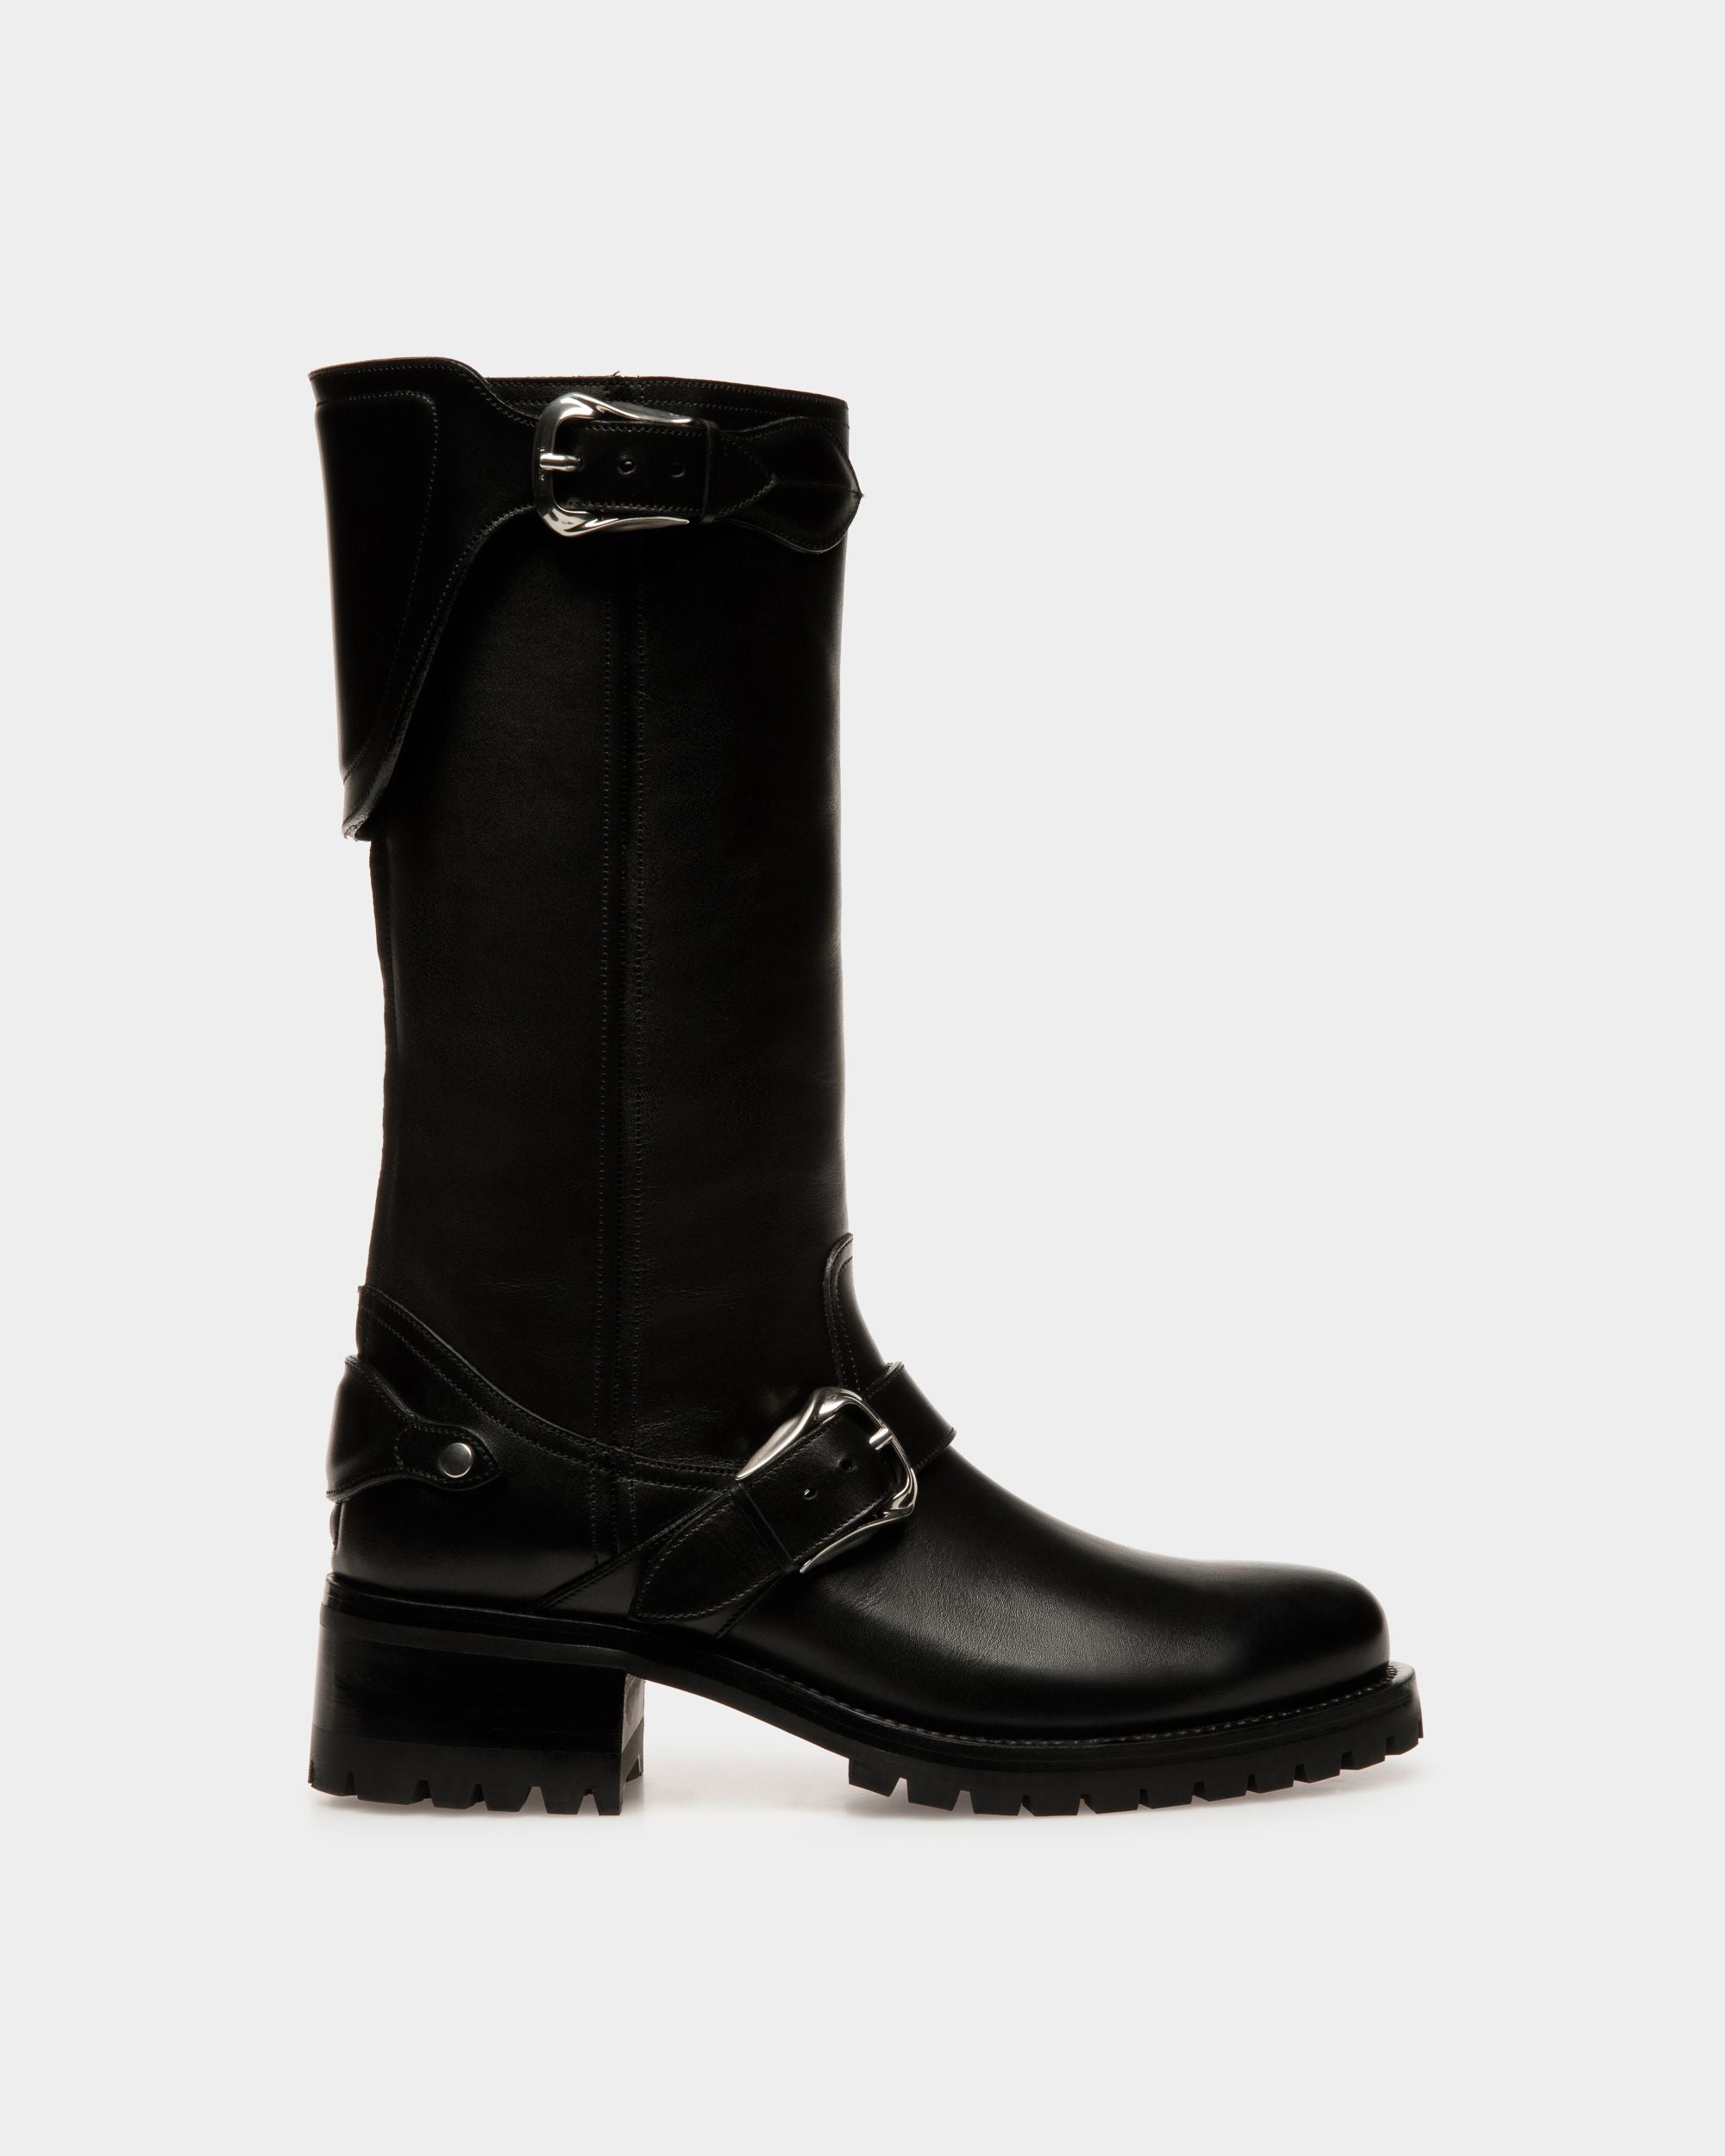 Ardis | Women's Long Boots | Black Leather | Bally | Still Life Side